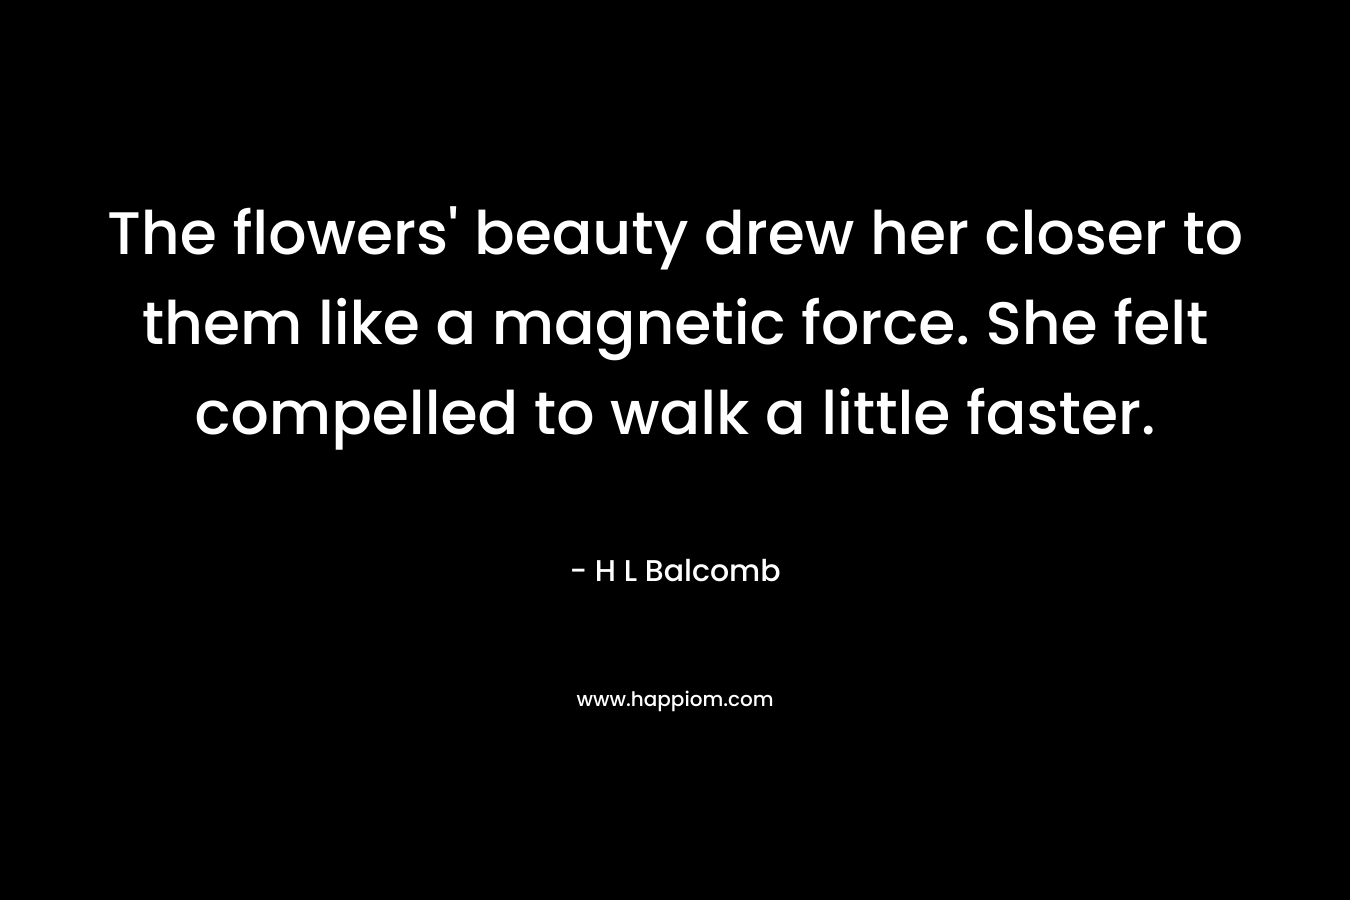 The flowers' beauty drew her closer to them like a magnetic force. She felt compelled to walk a little faster.